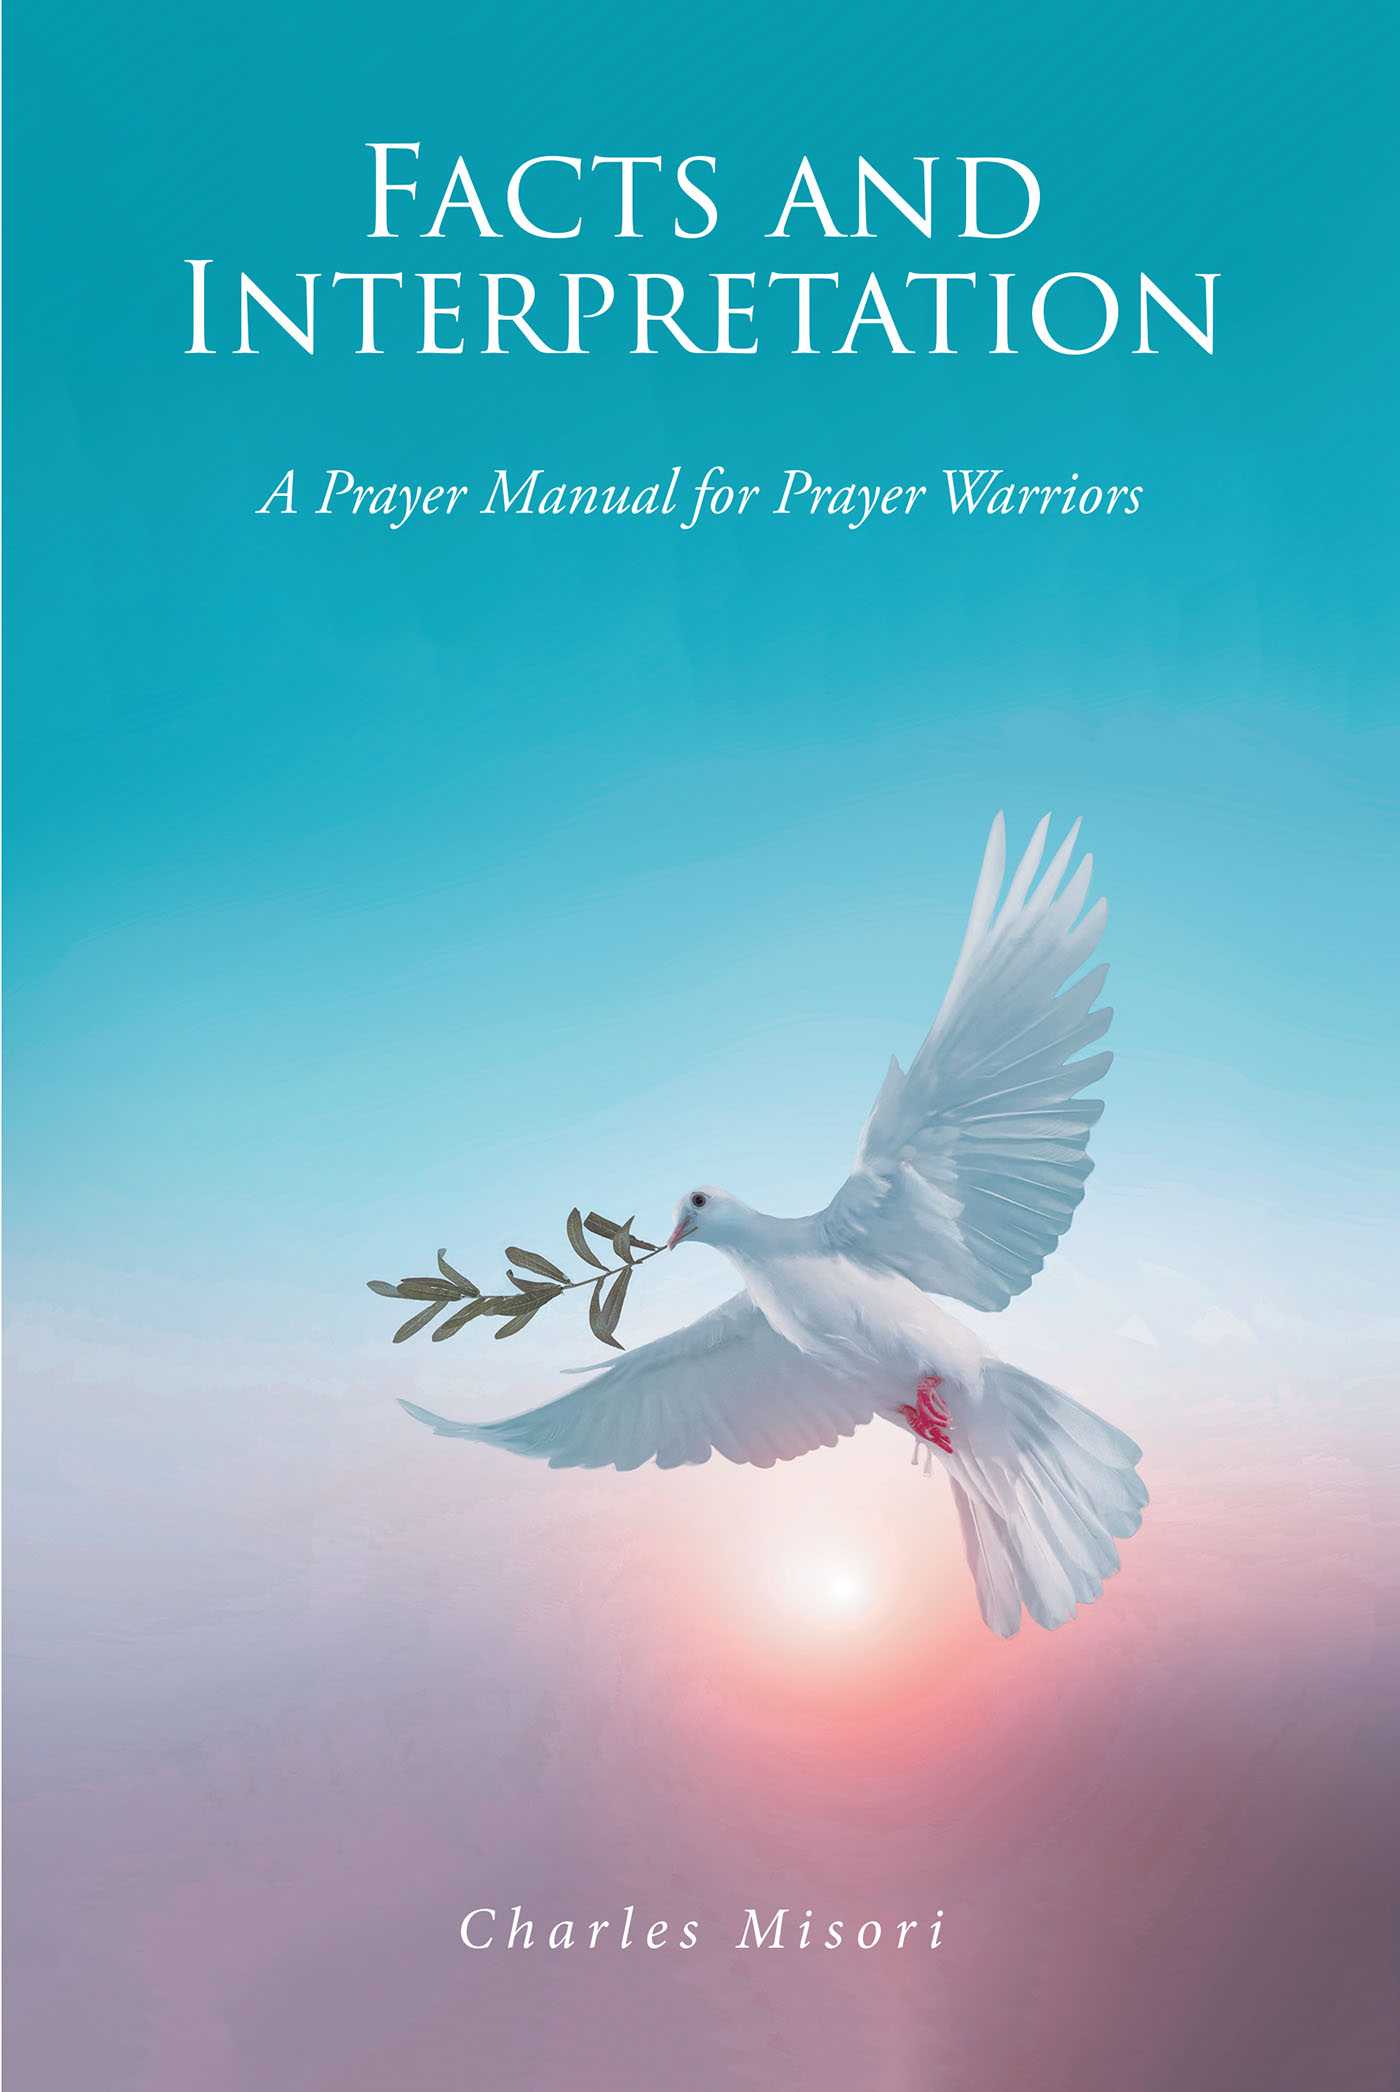 Charles Misori’s Newly Released "Facts and Interpretation: A Prayer Manual for Prayer Warriors" is an Encouraging Resource for Learning How to Effectively Pray